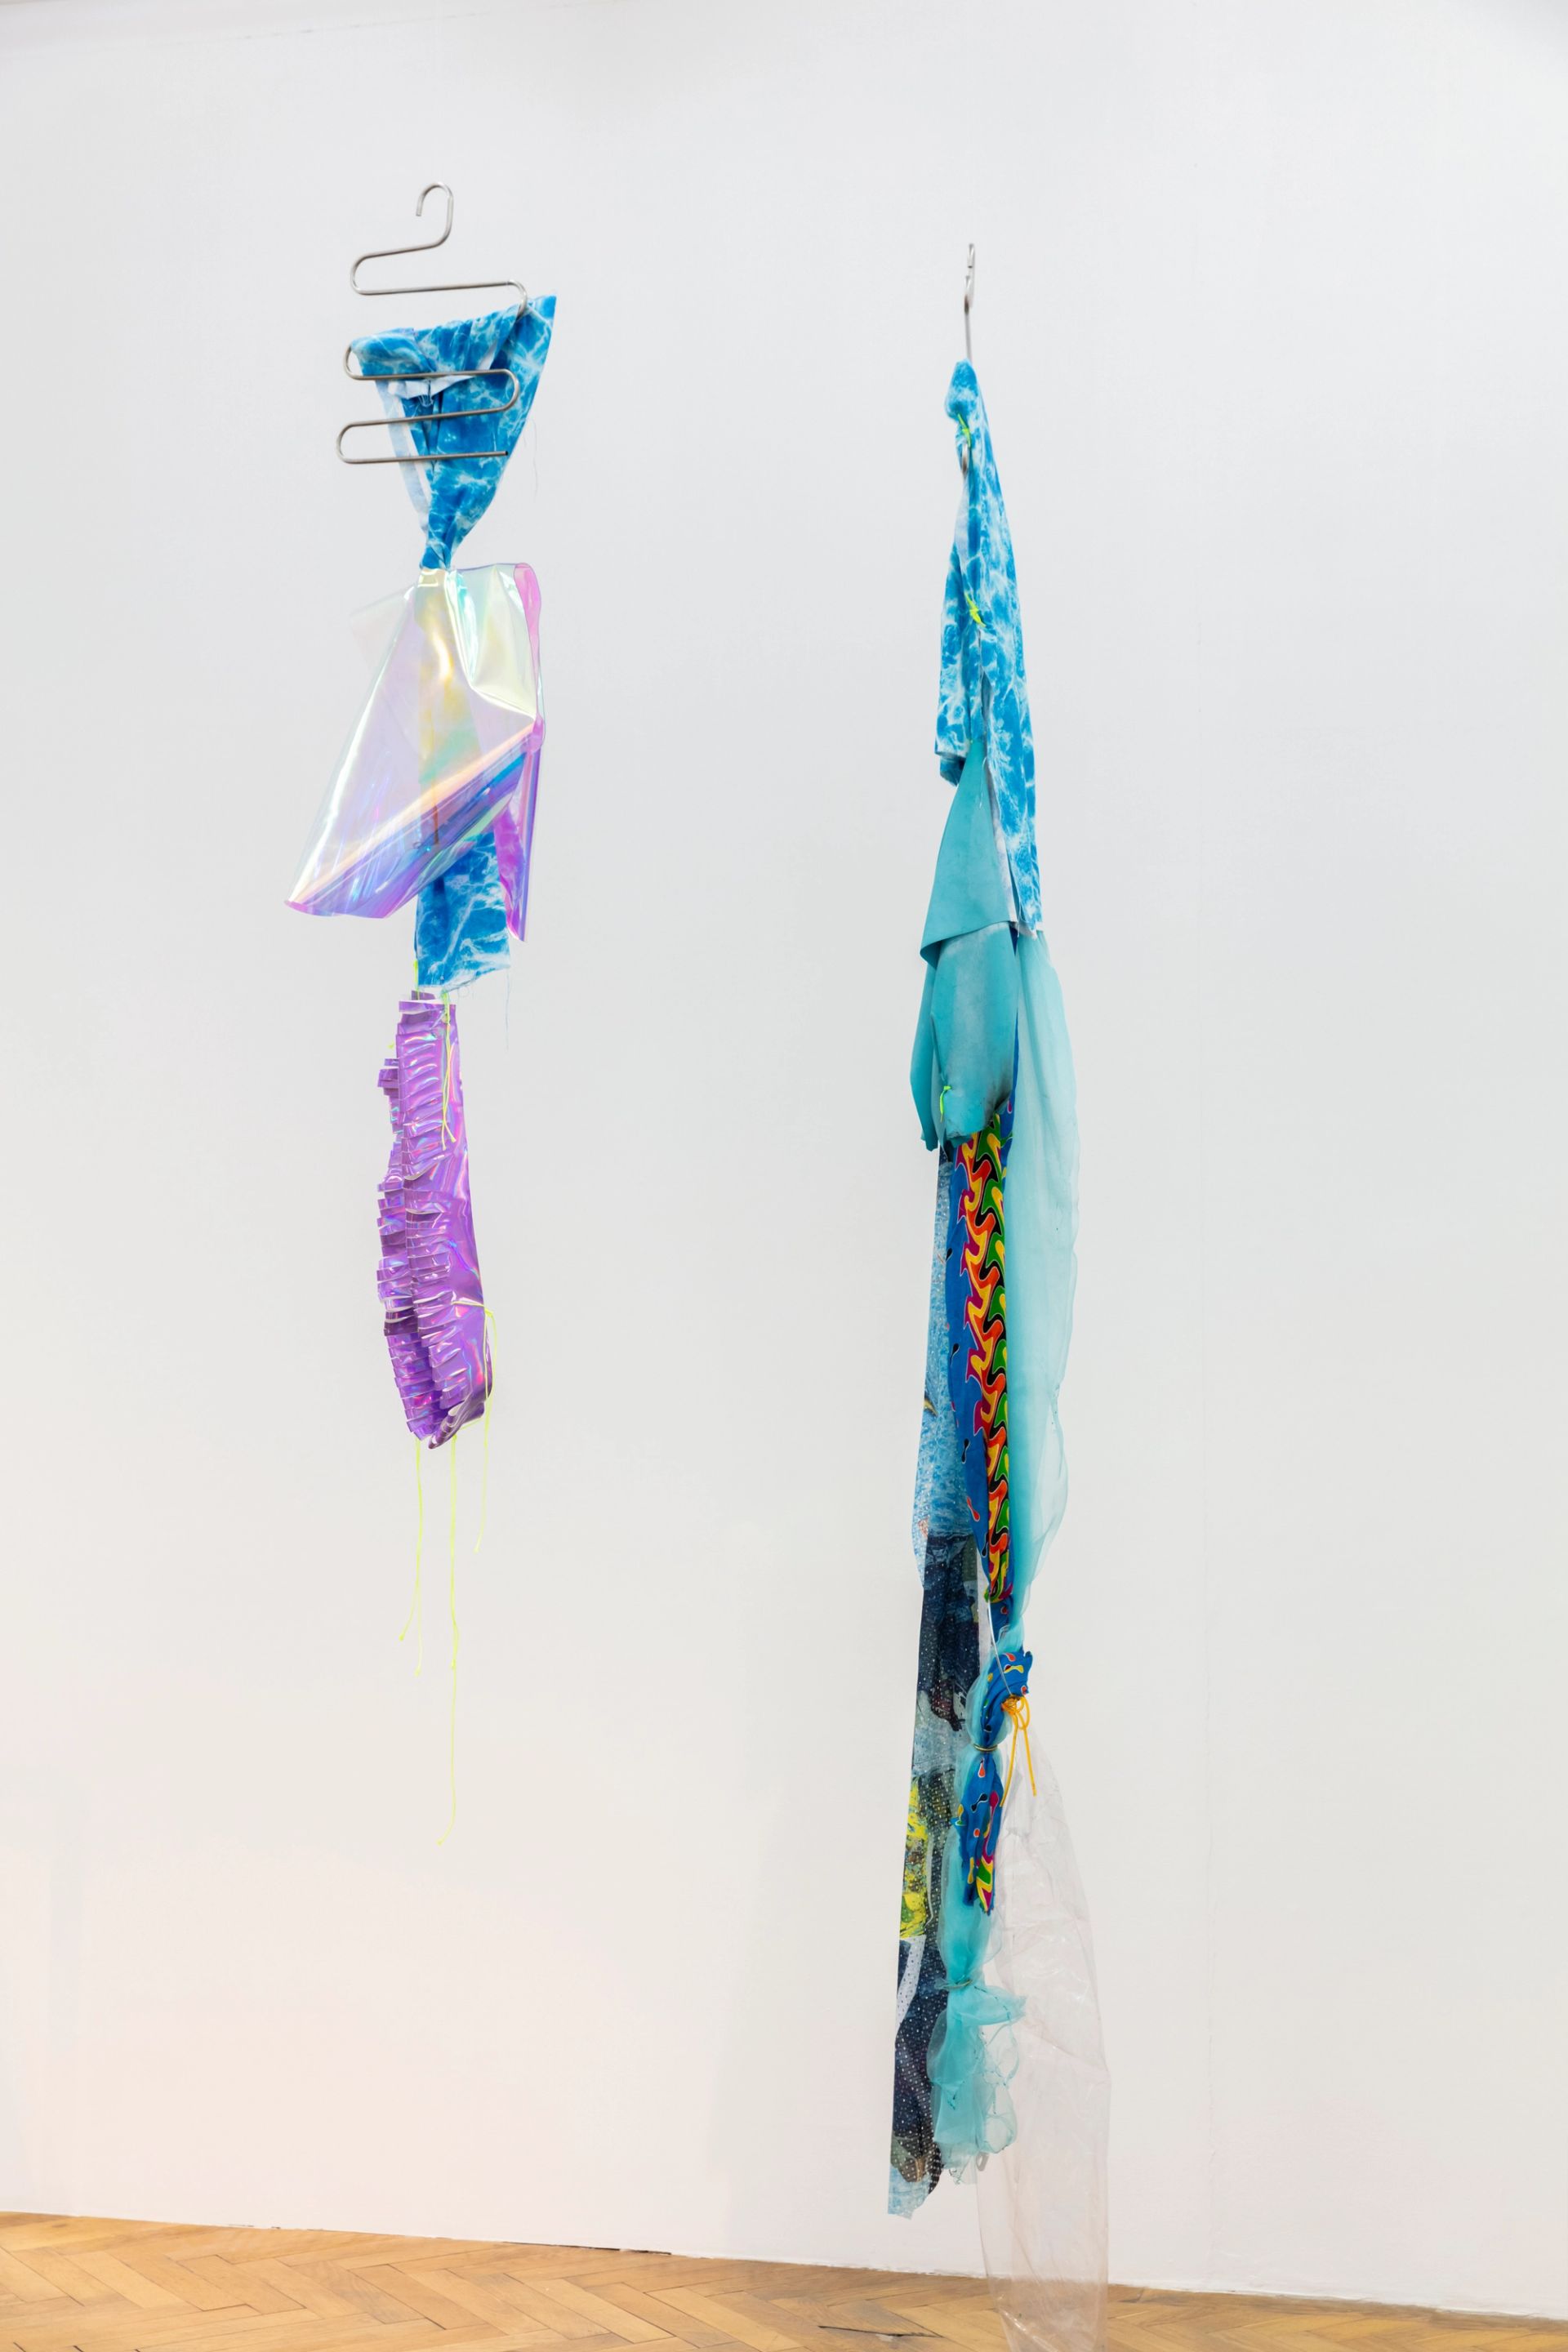 Anna Ehrenstein, Convivial Fiber, 2021, Tools for Conviviality, sublimation-print on polyester, cotton, latex, pvc, metal, shoelaces, clothing hanger, reflective cord